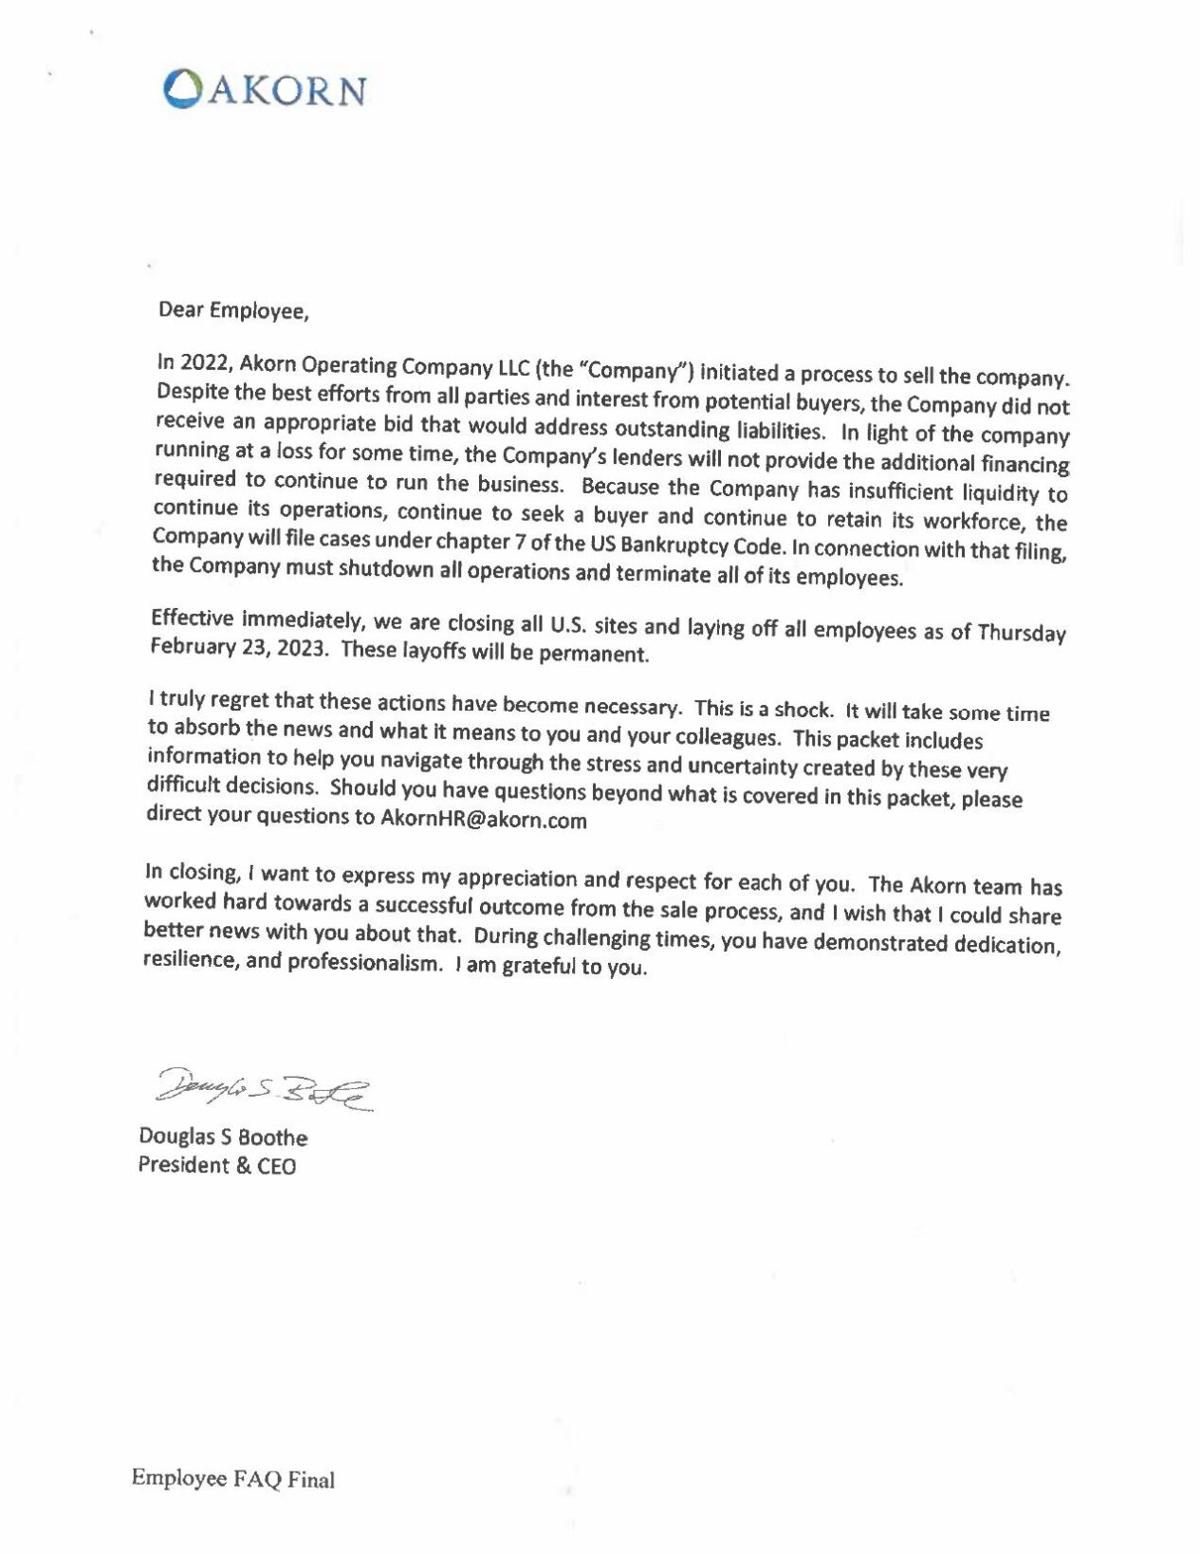 READ IT: Akorn layoff  letter to employees